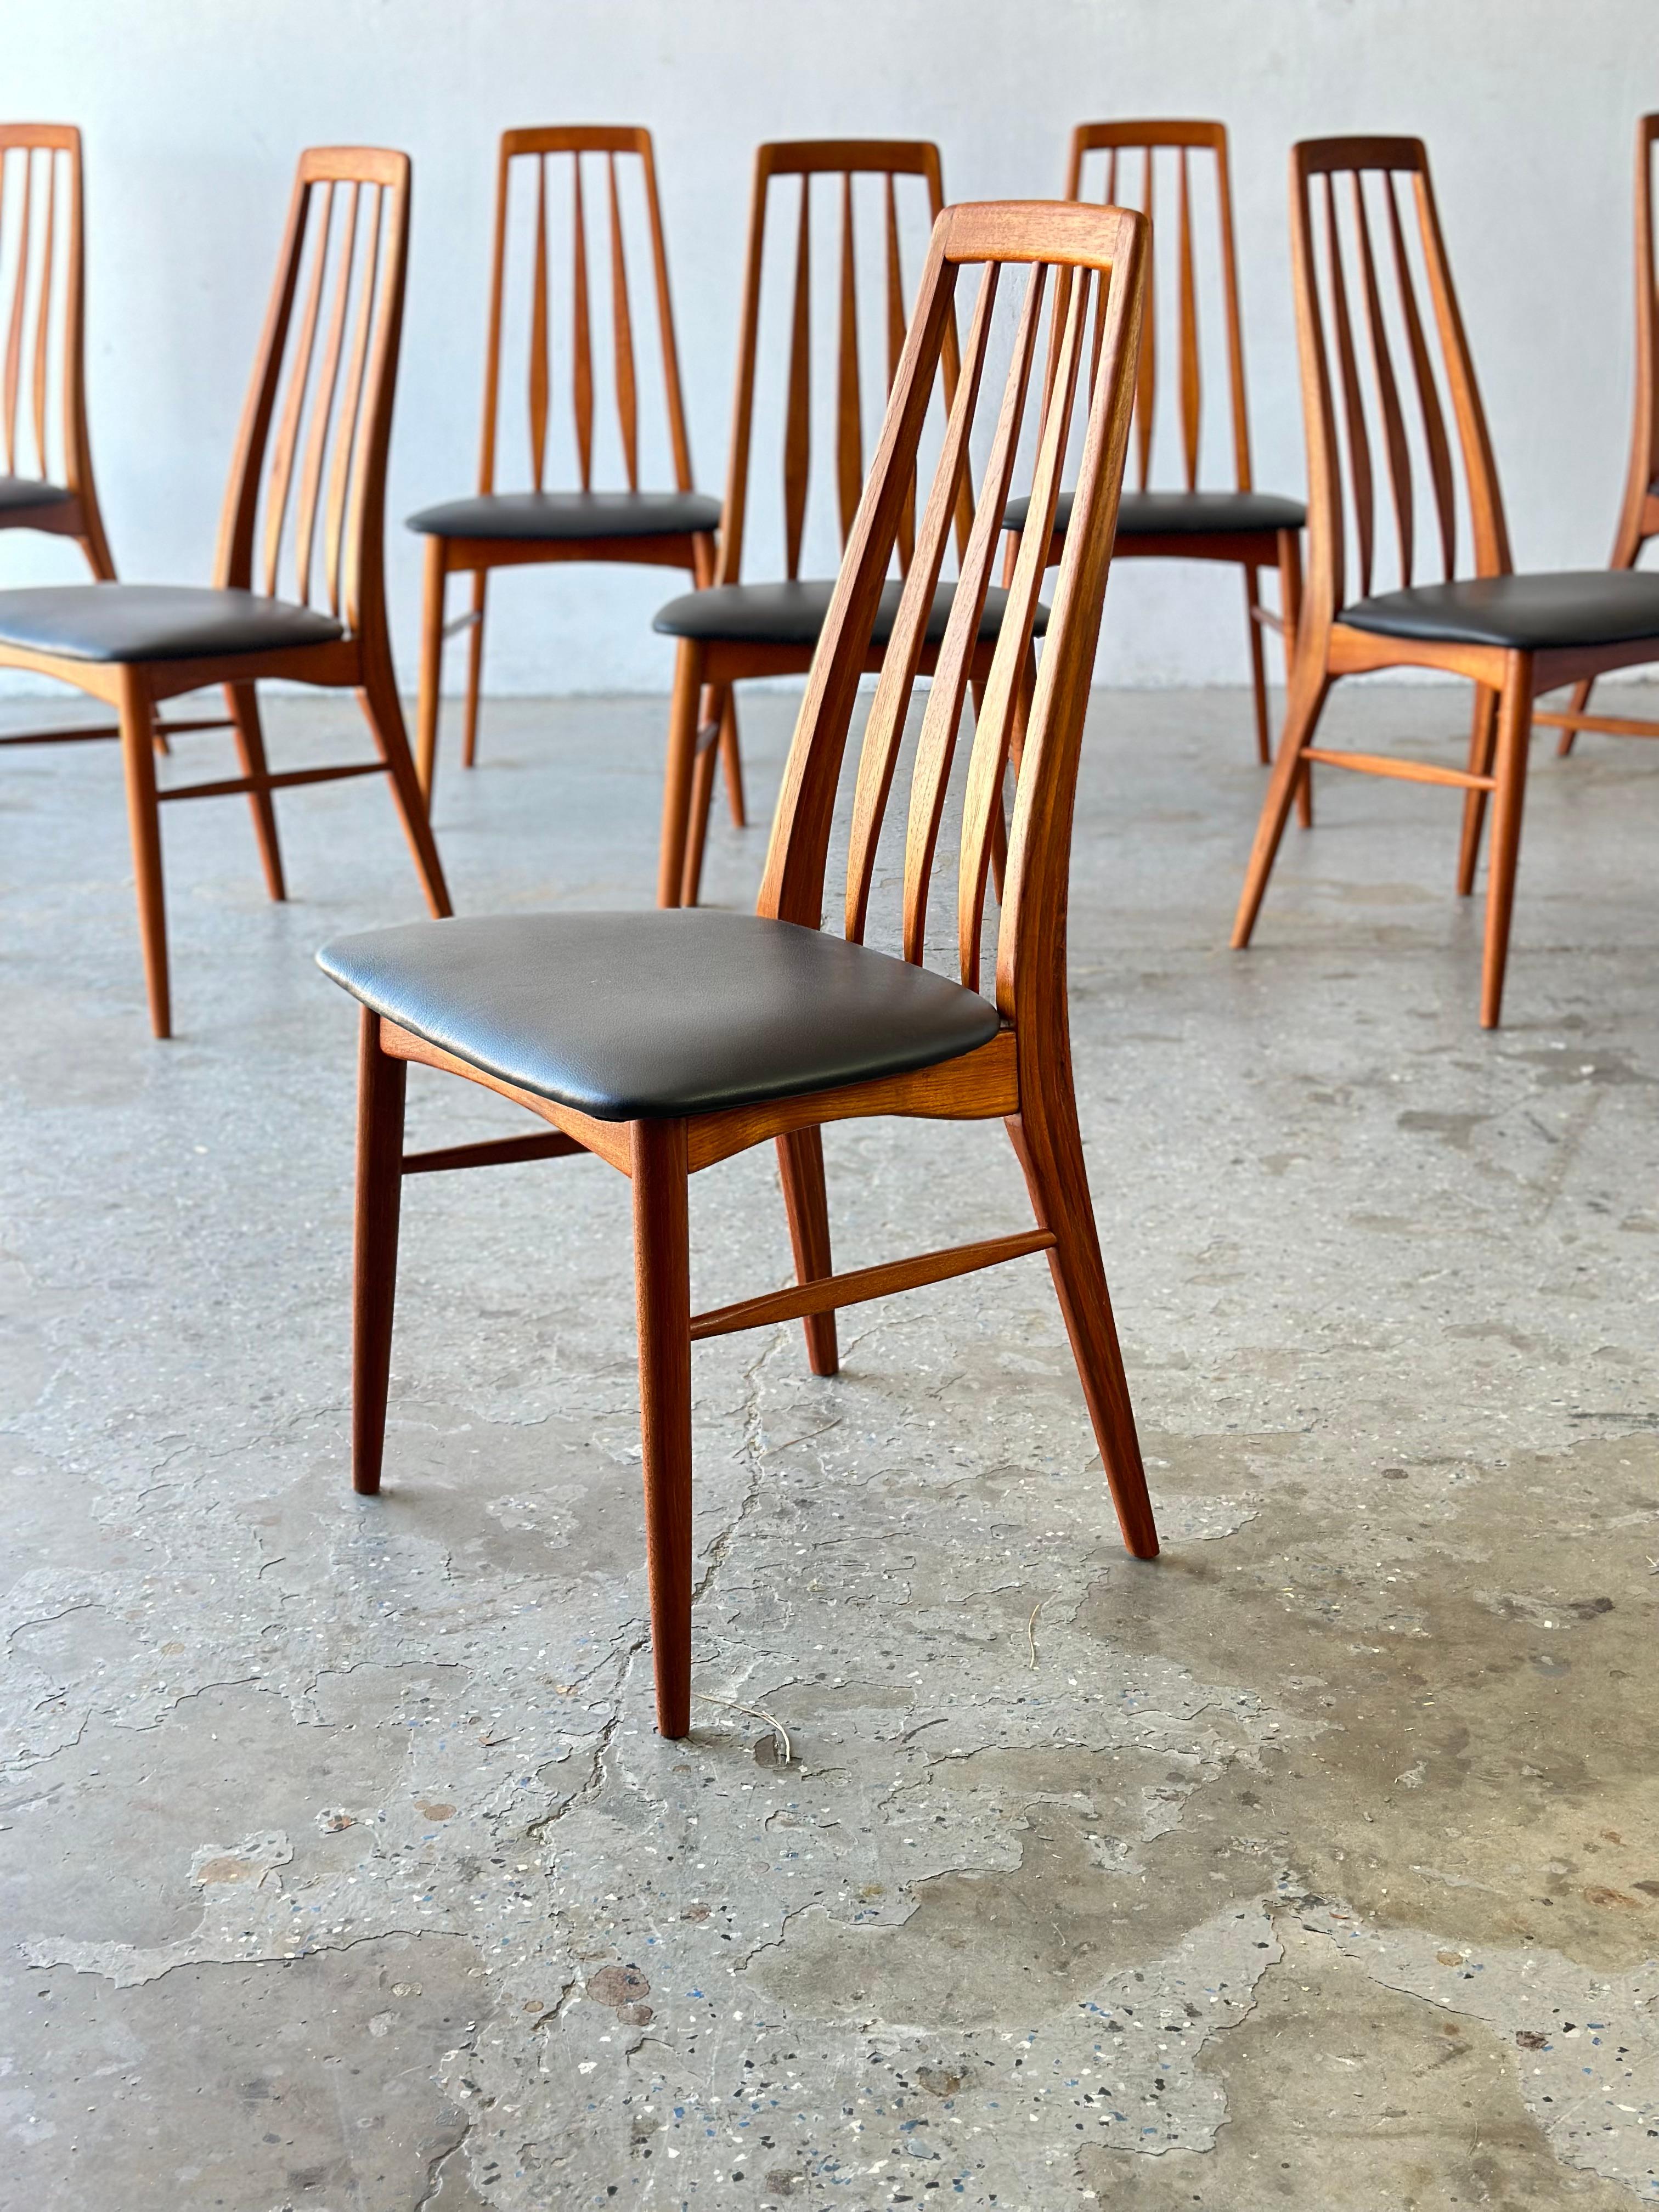 Mid-Century Modern Danish Set of 8 Chairs in Teak Model Eva by Niels Kofoed

Set of 8 midcentury Danish teak 'Eva' dining chairs designed by Niels Koefoed in 1964 for Koefoed Hornslet. Striking high back vertical slat dining chairs with decorative